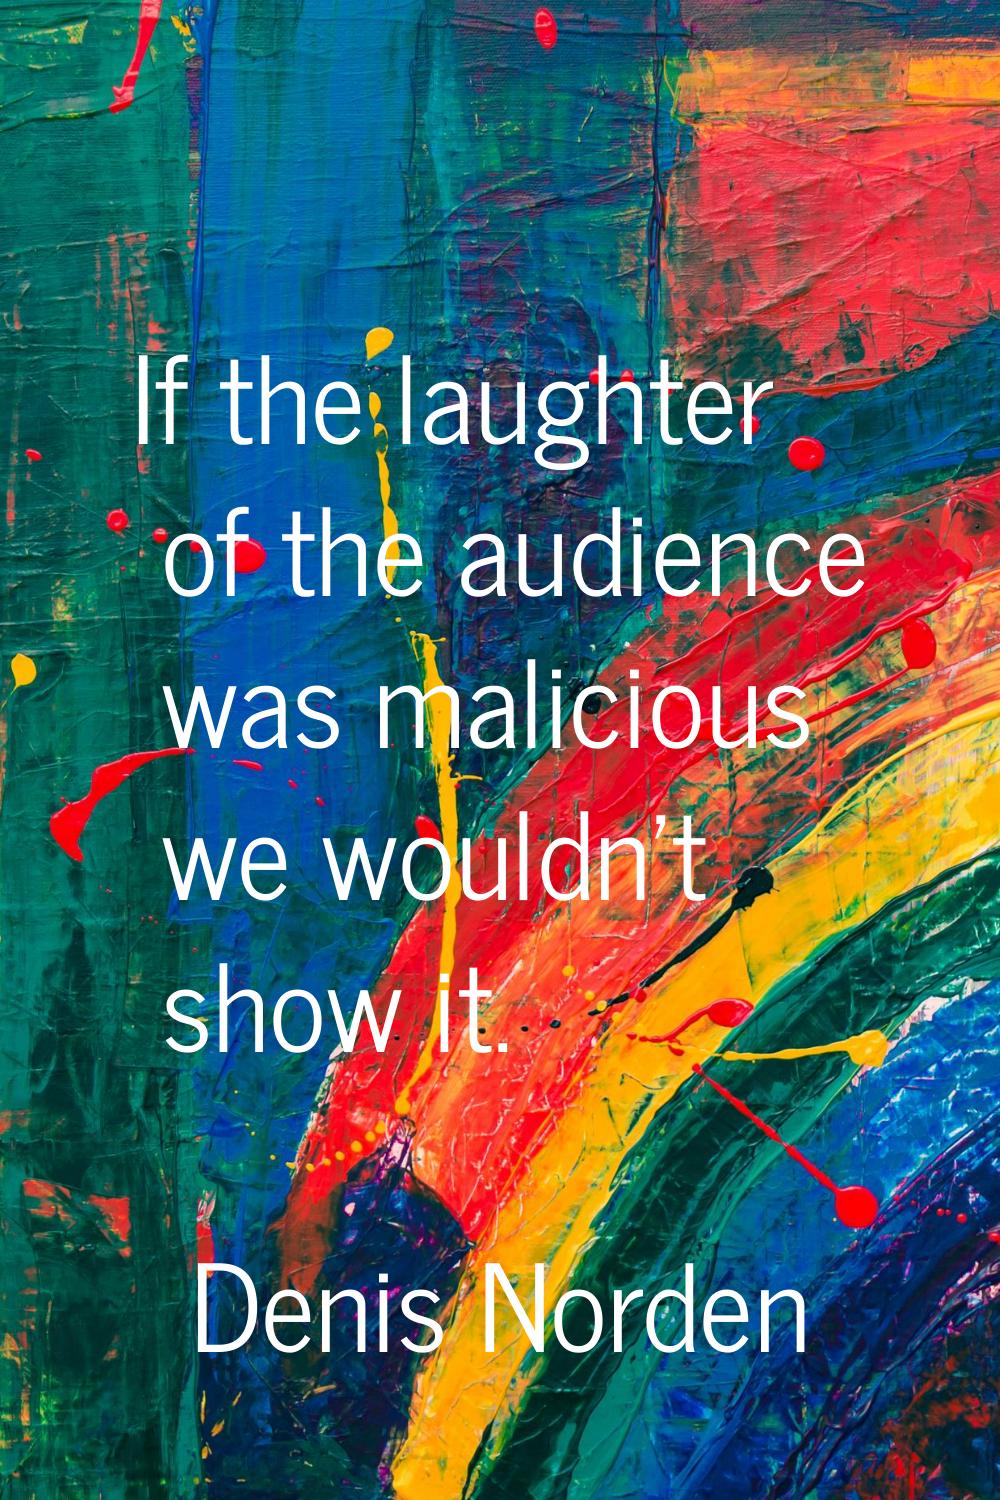 If the laughter of the audience was malicious we wouldn't show it.